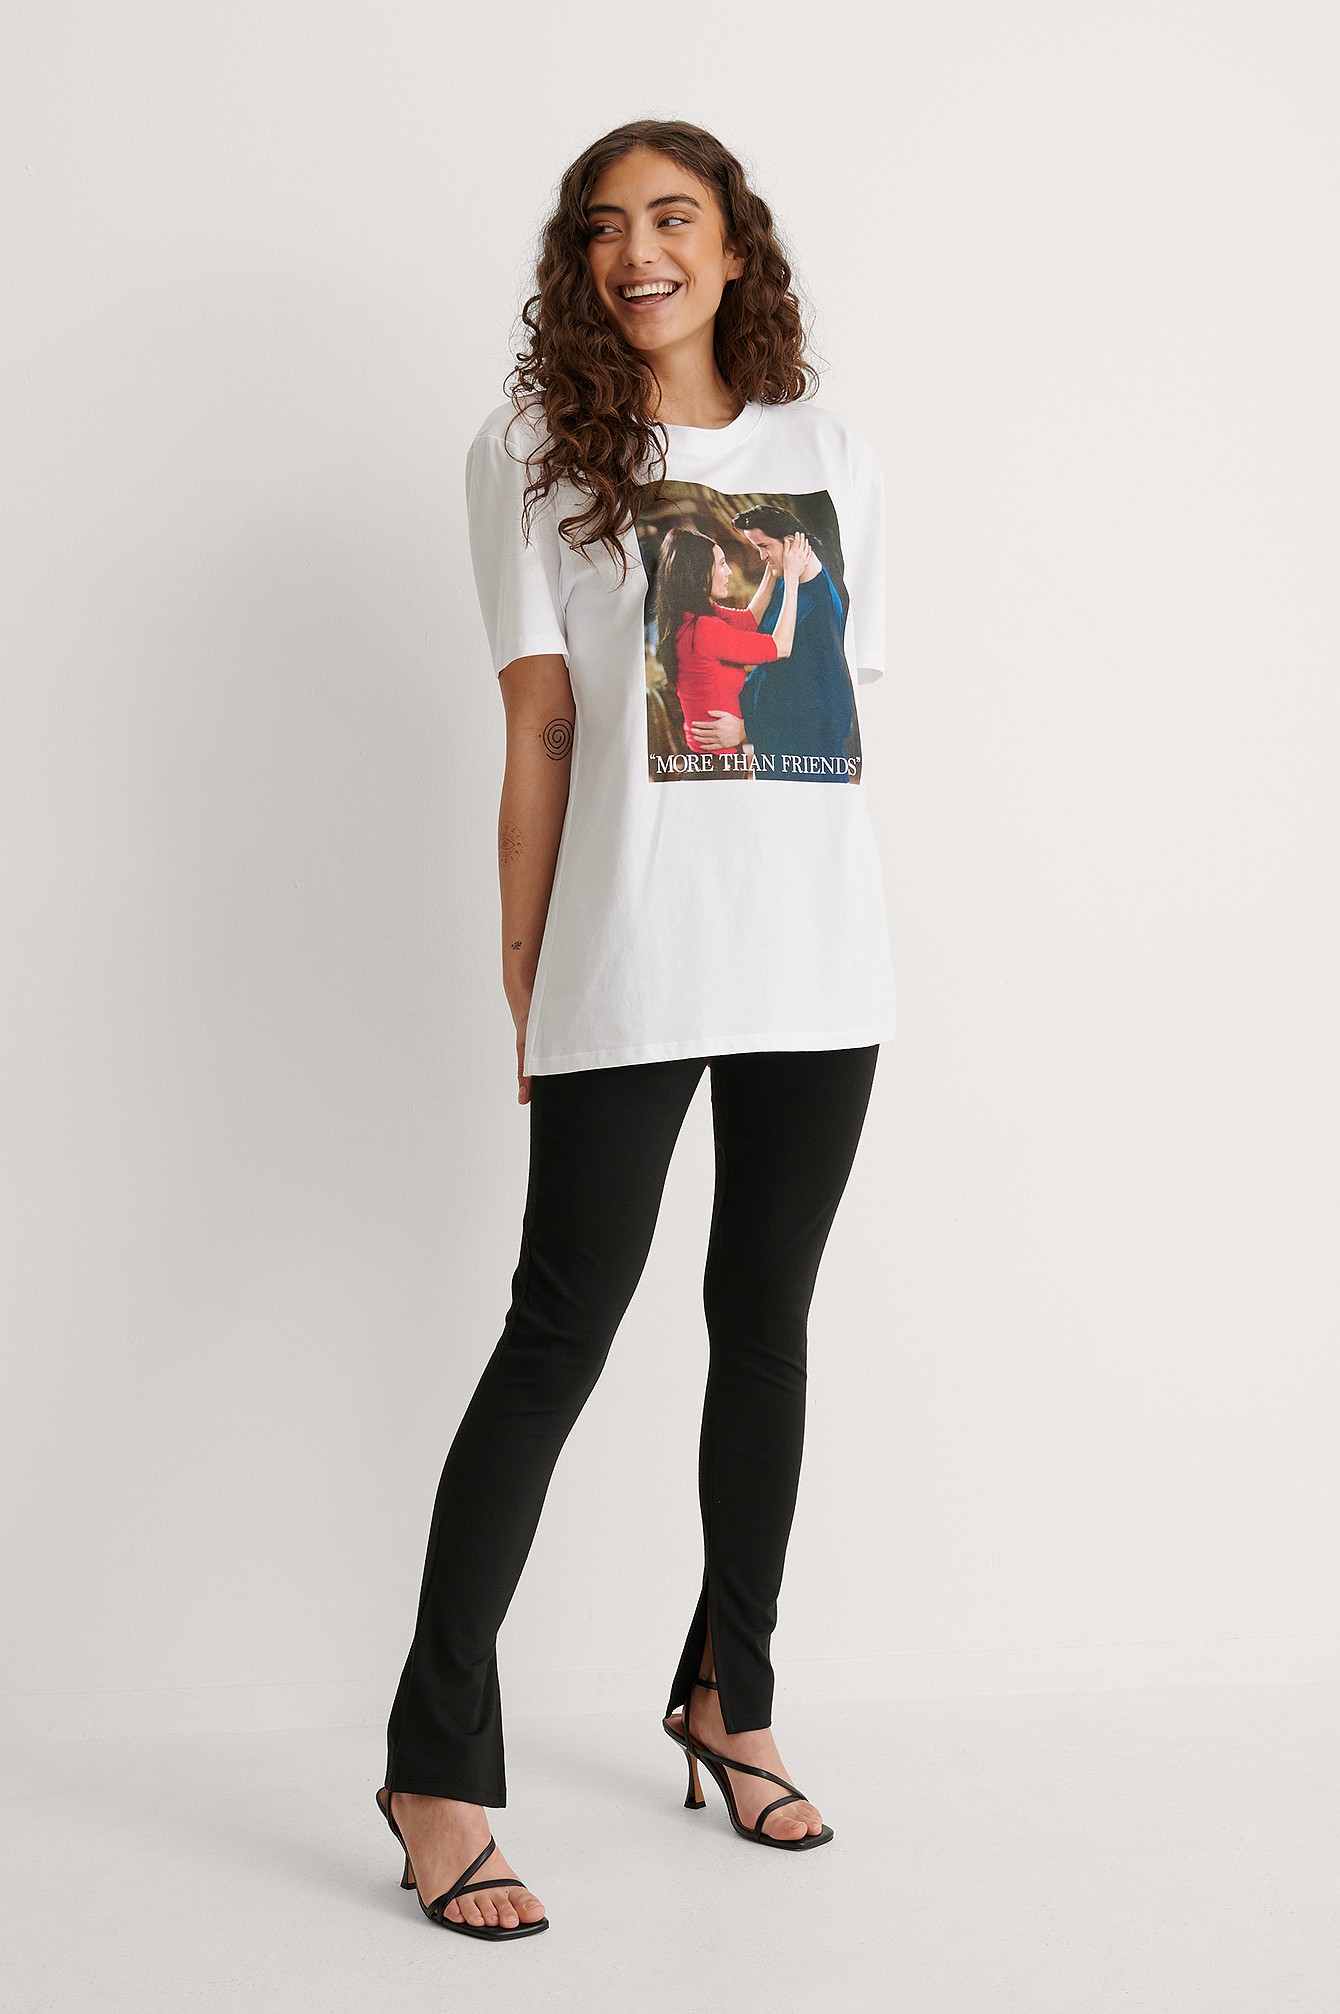 FRIENDS Unisex Print Tee Outfit